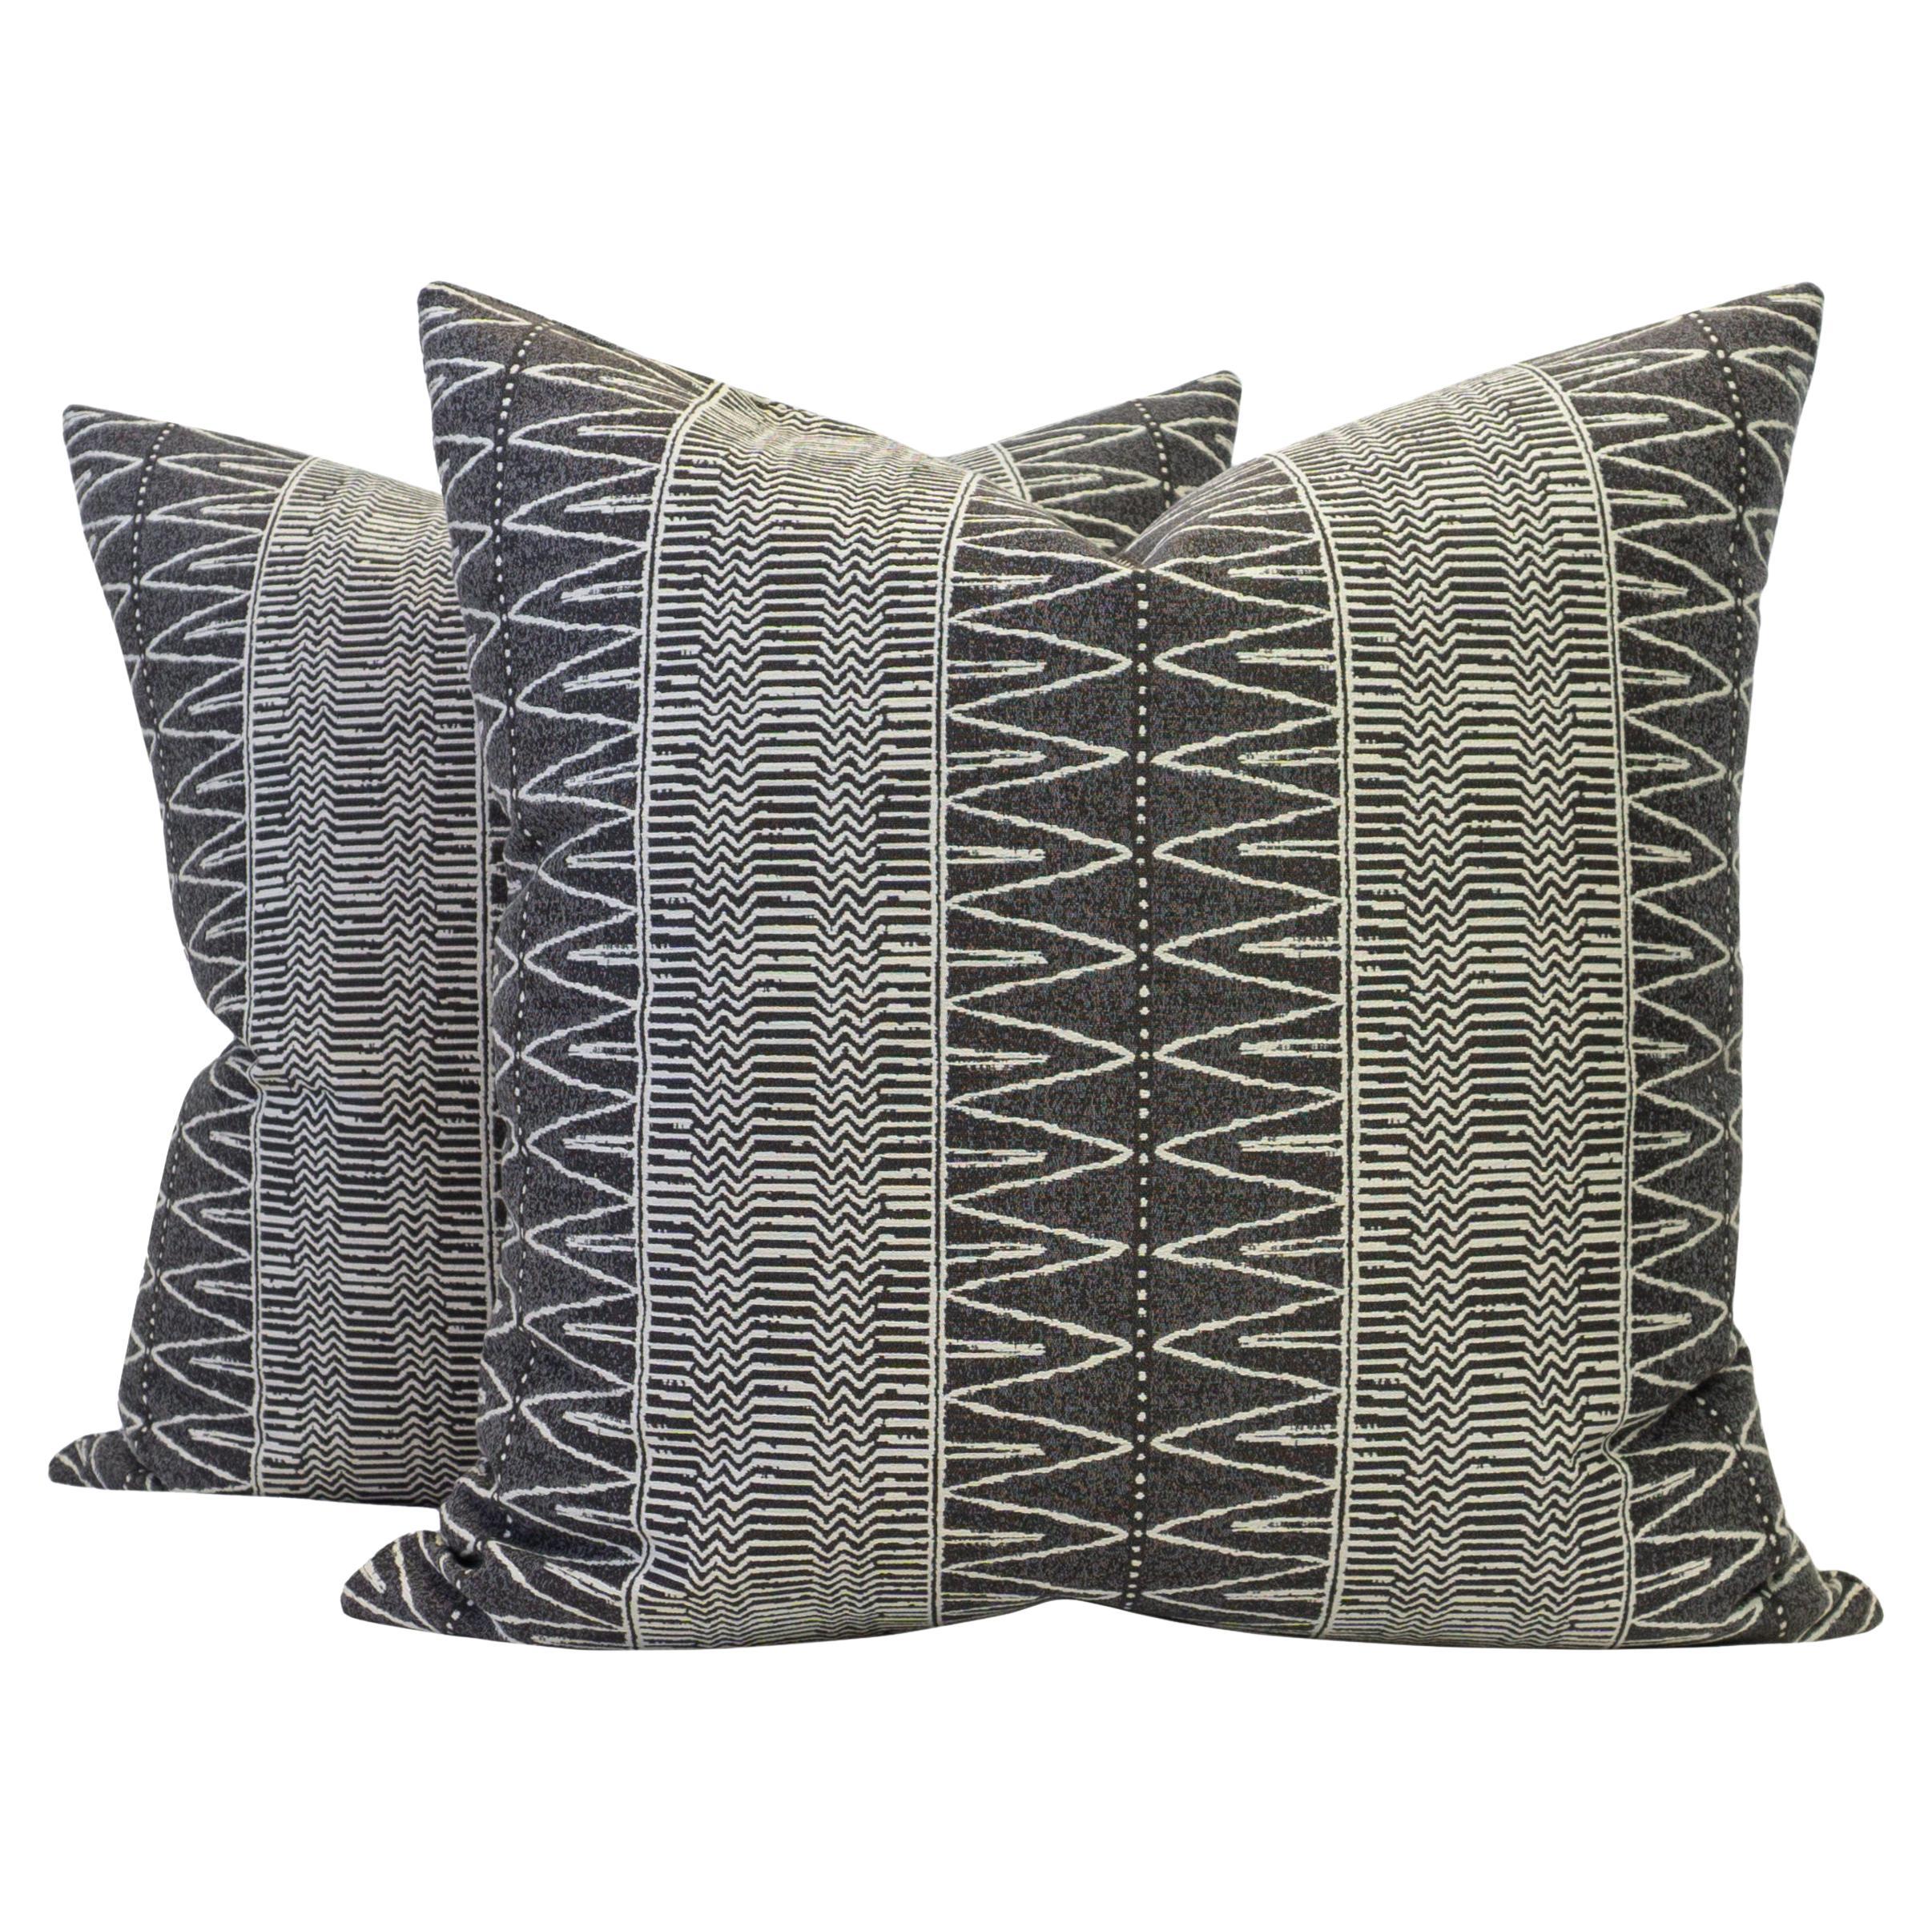 Zig Zag Patterned Stain Resistant Fabric Gray and White Square Pillows